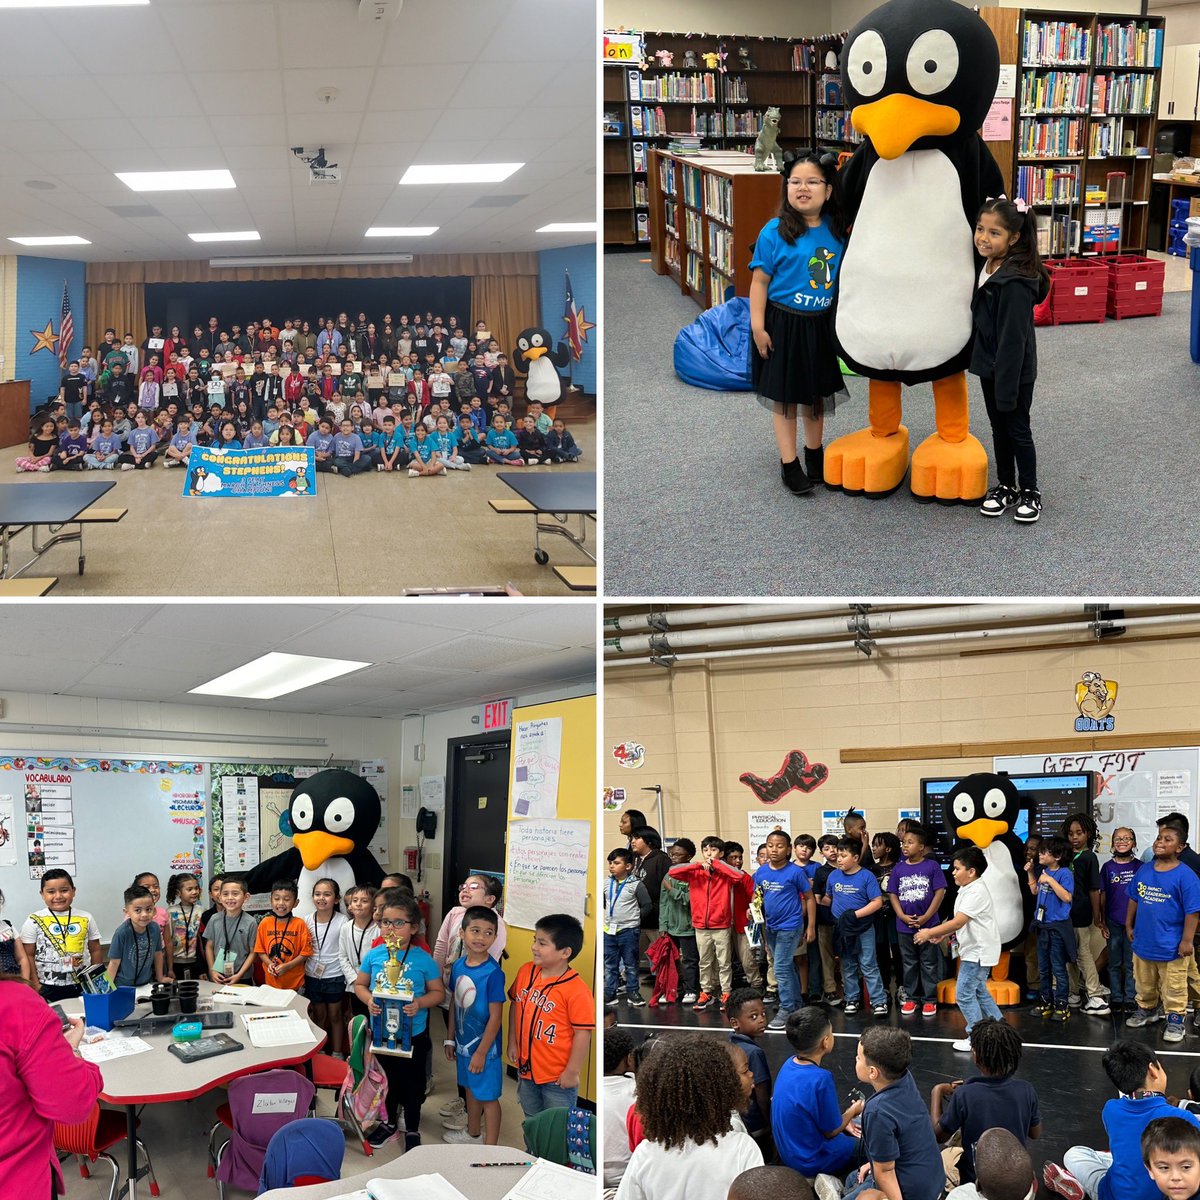 Jiji came to visit some of our Aldine students today. Congrats to students from @JonesECPKK_AISD @Carmichael_AISD @StephensES_AISD @Impact_AISD for winning our ST MATHness competition. @STMath @Mrssmart615 @STARS_902